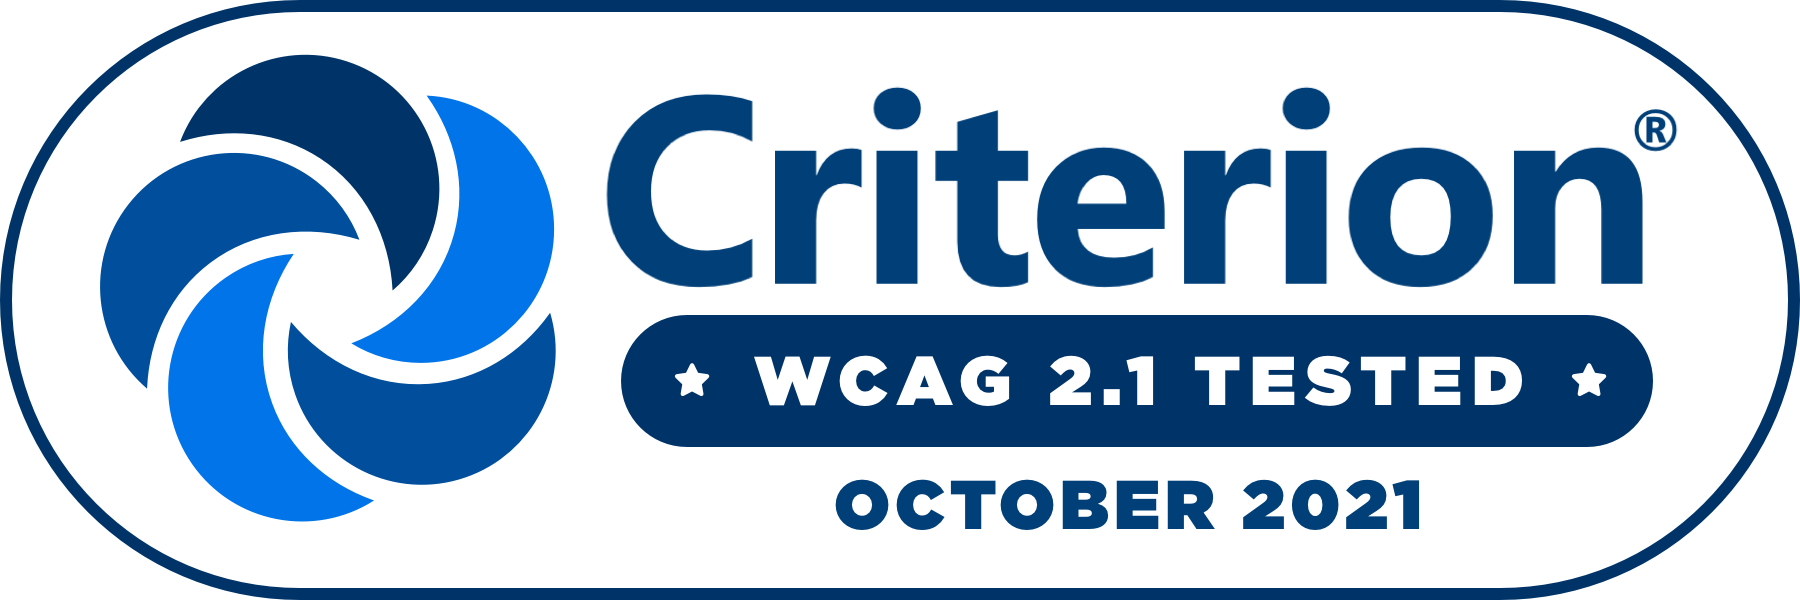 Criterion WCAG 2.1 TESTED October 2021